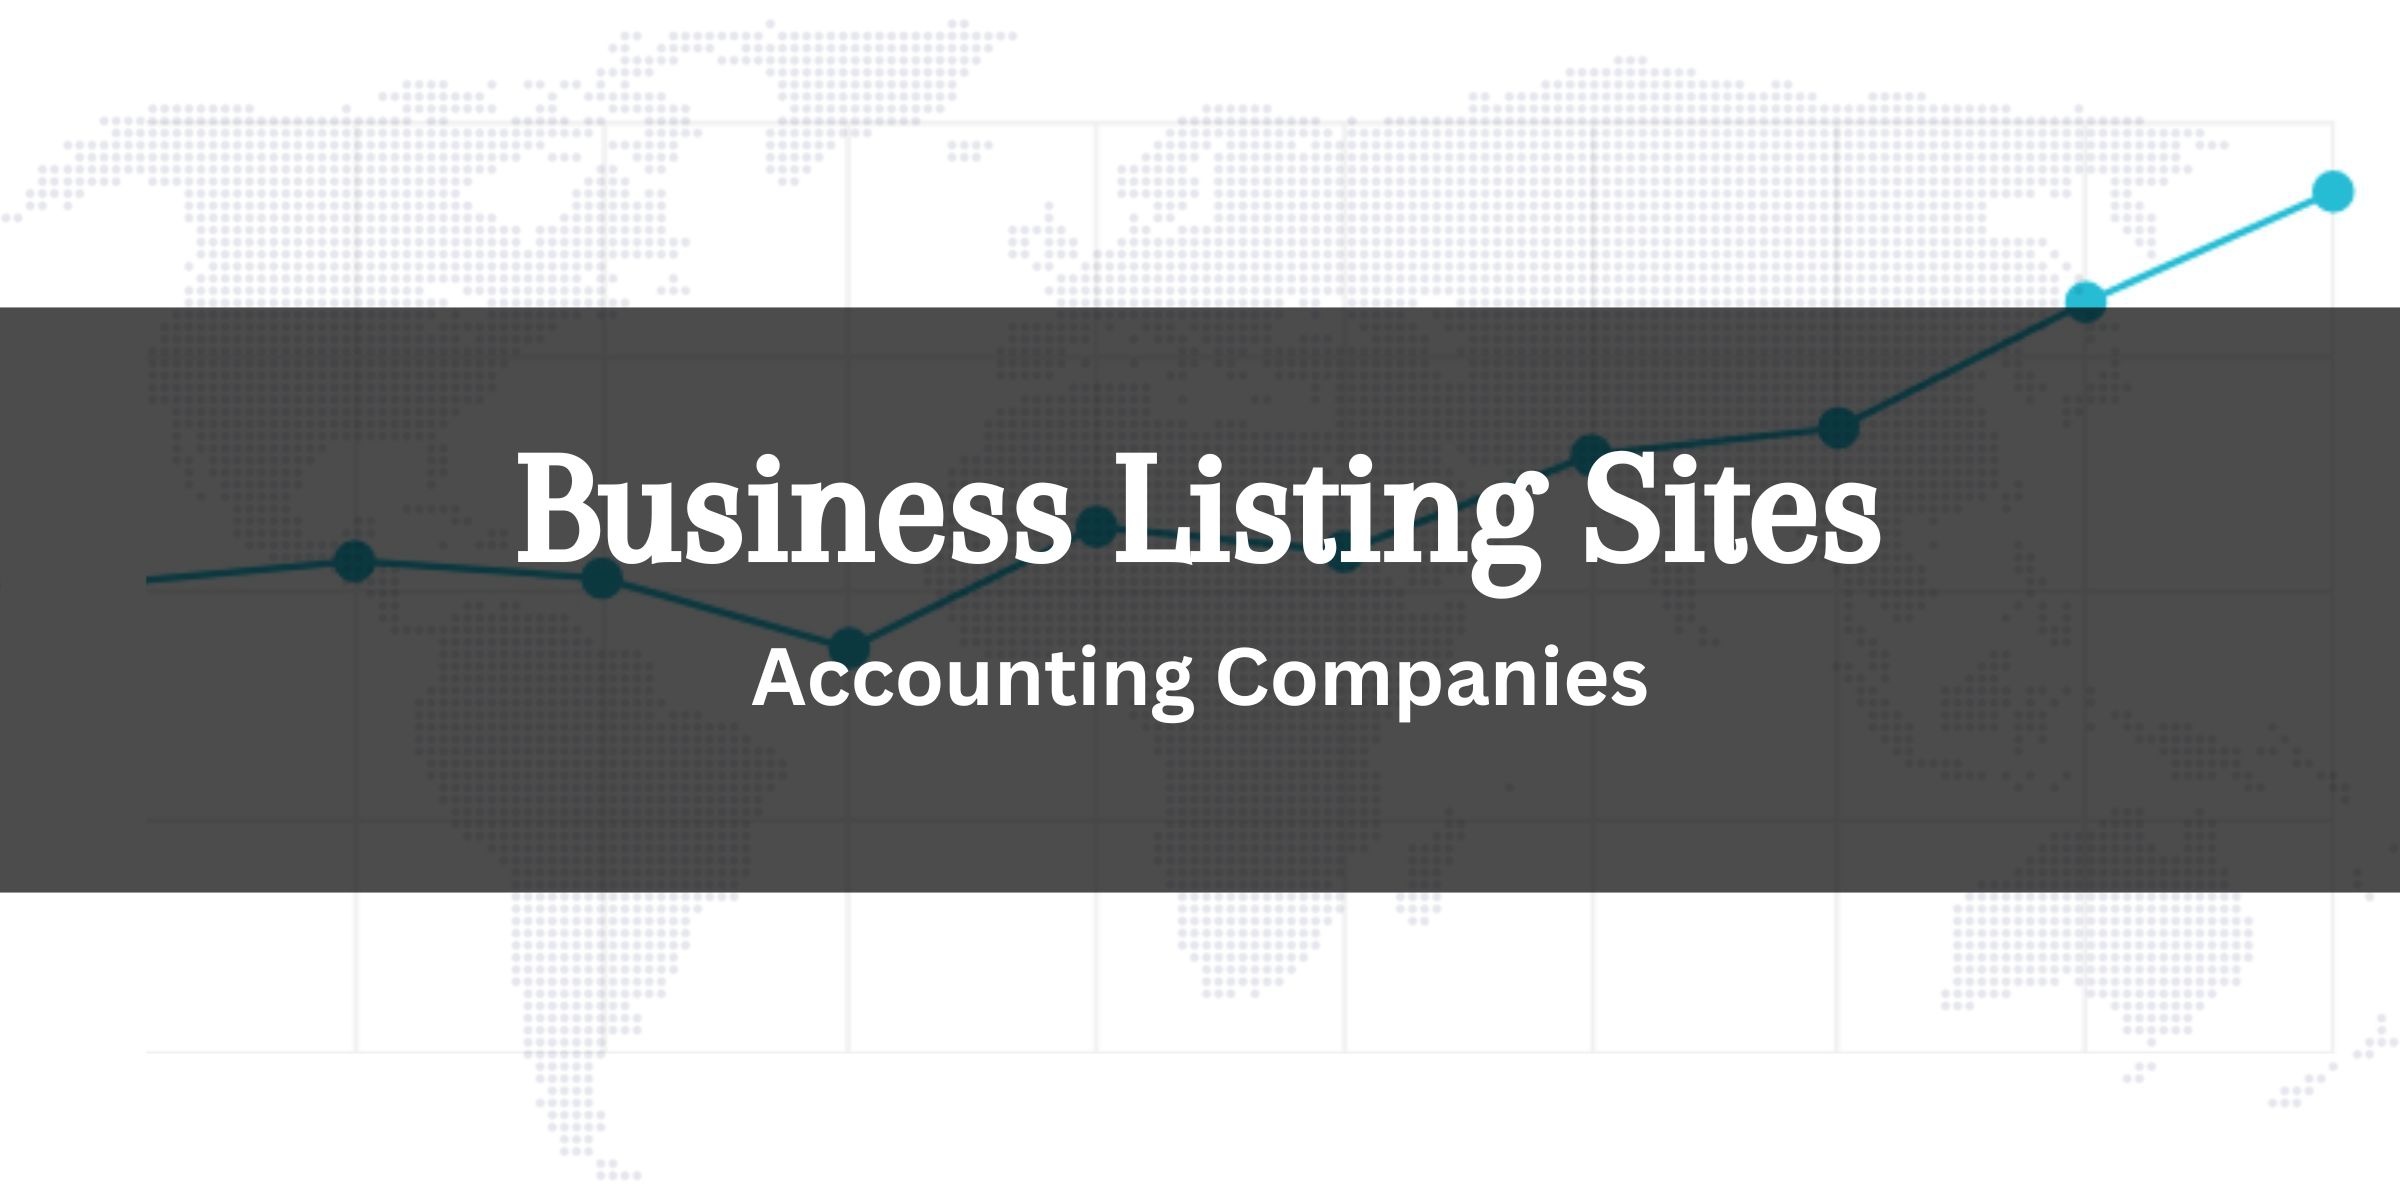 Top Business Listing Sites for Accounting Companies